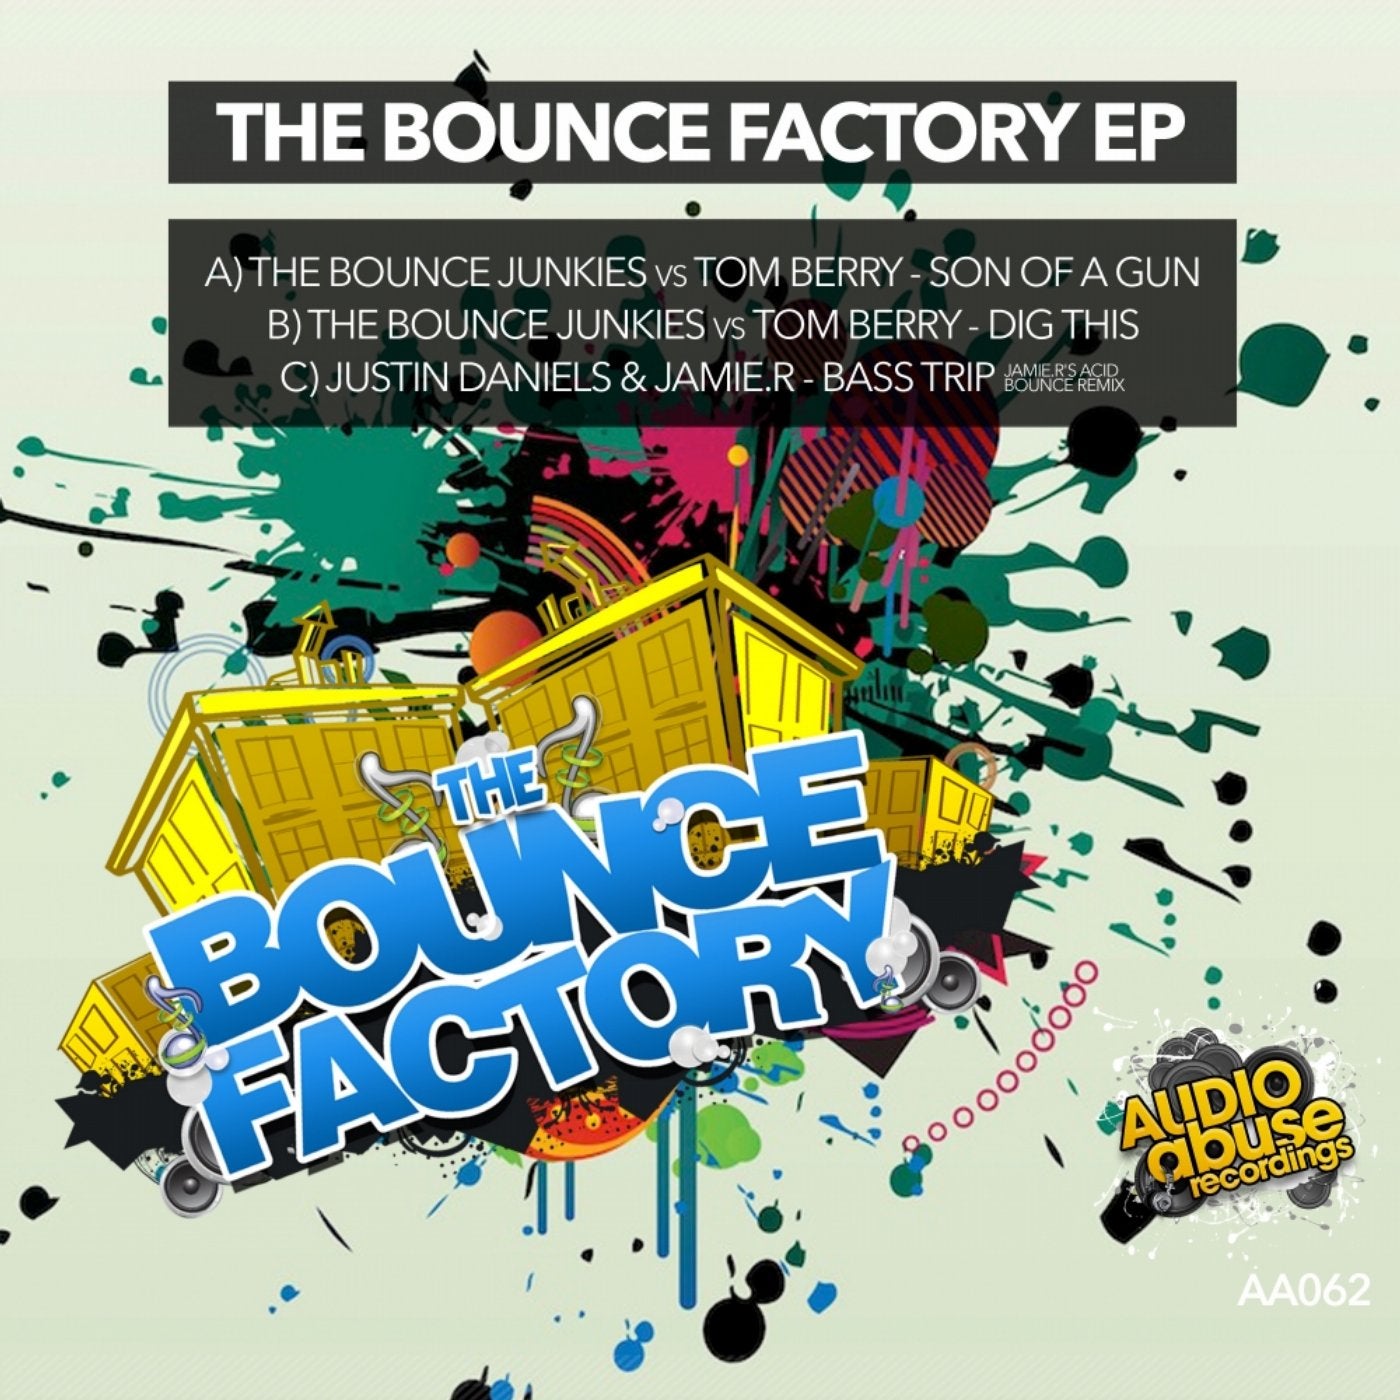 The Bounce Factory EP